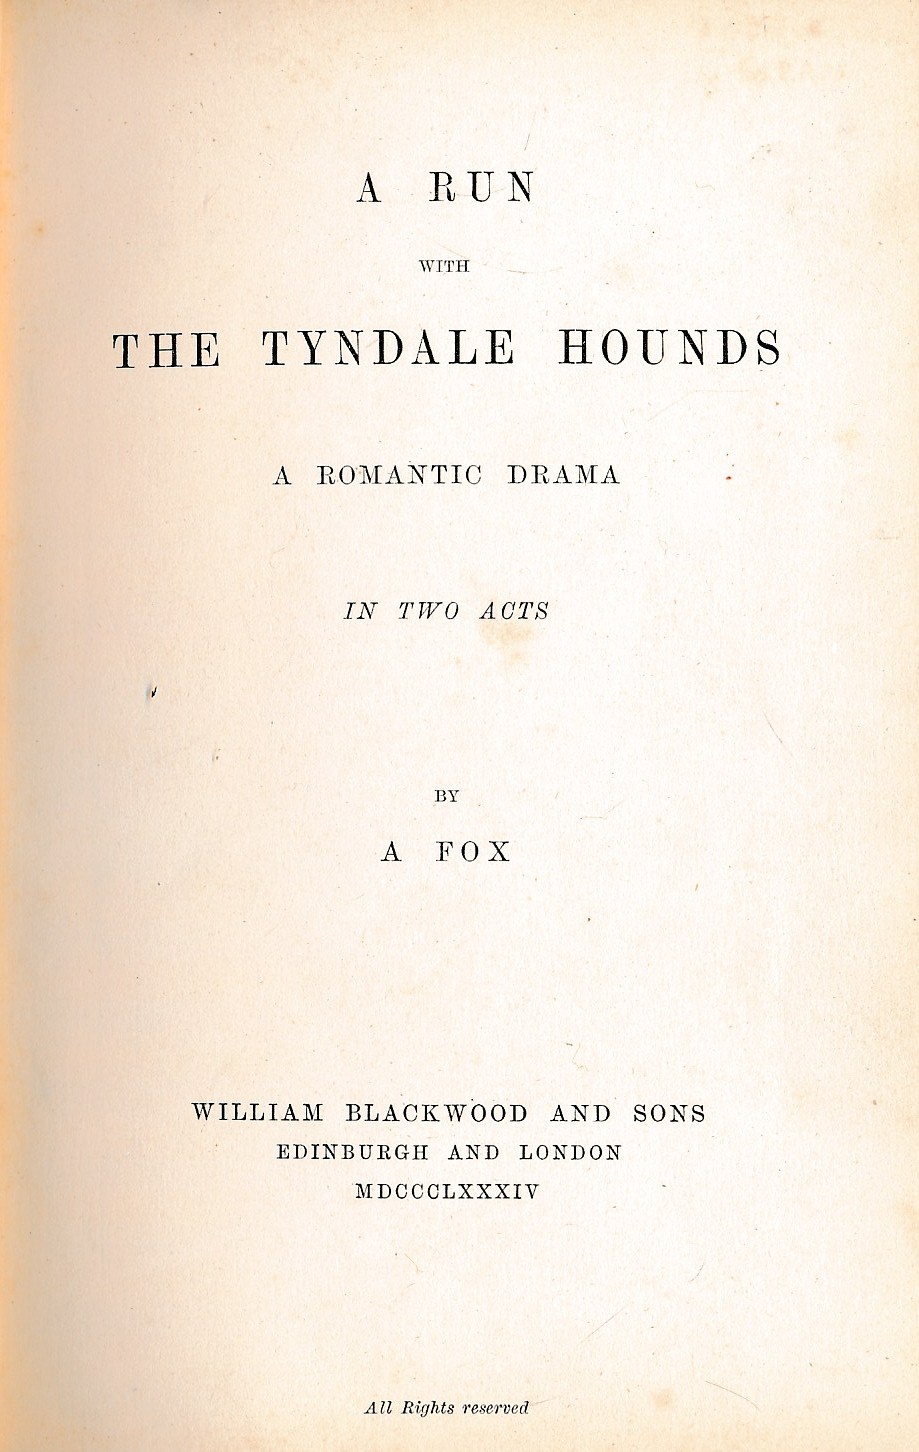 A Run with the Tyndale Hounds. A Romantic Drama in Two Acts by A Fox.